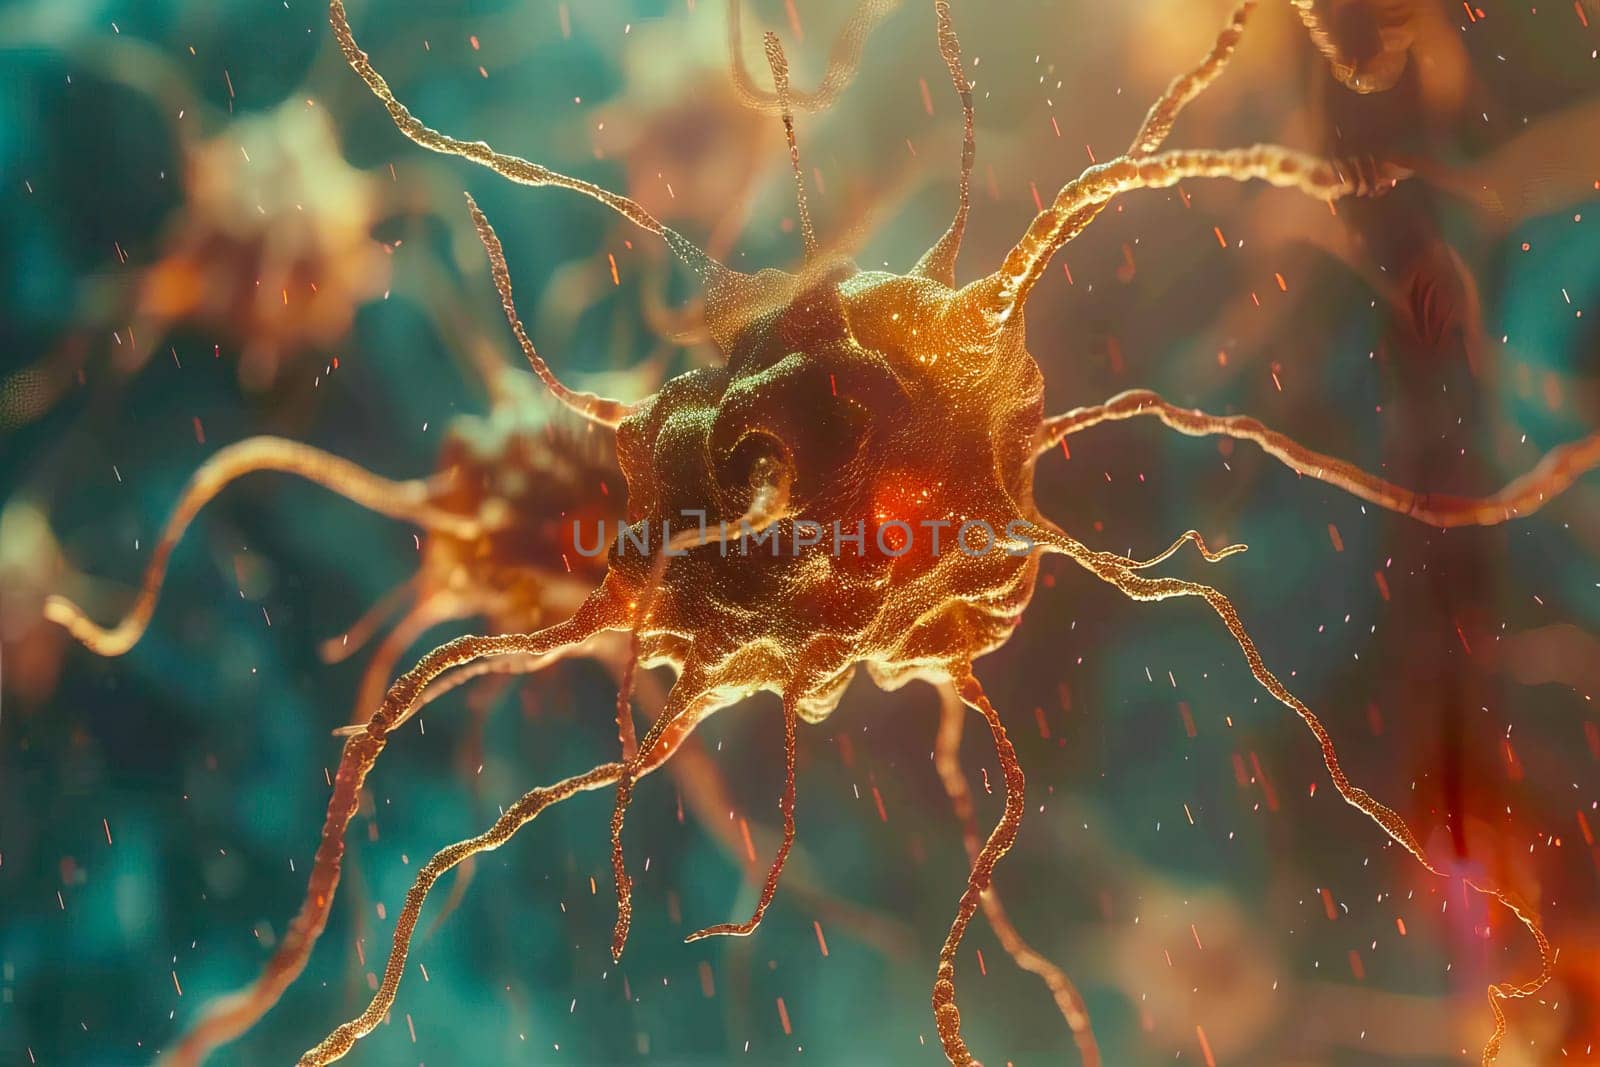 A close-up displaying the complexity of interconnected neurons firing in a brain.